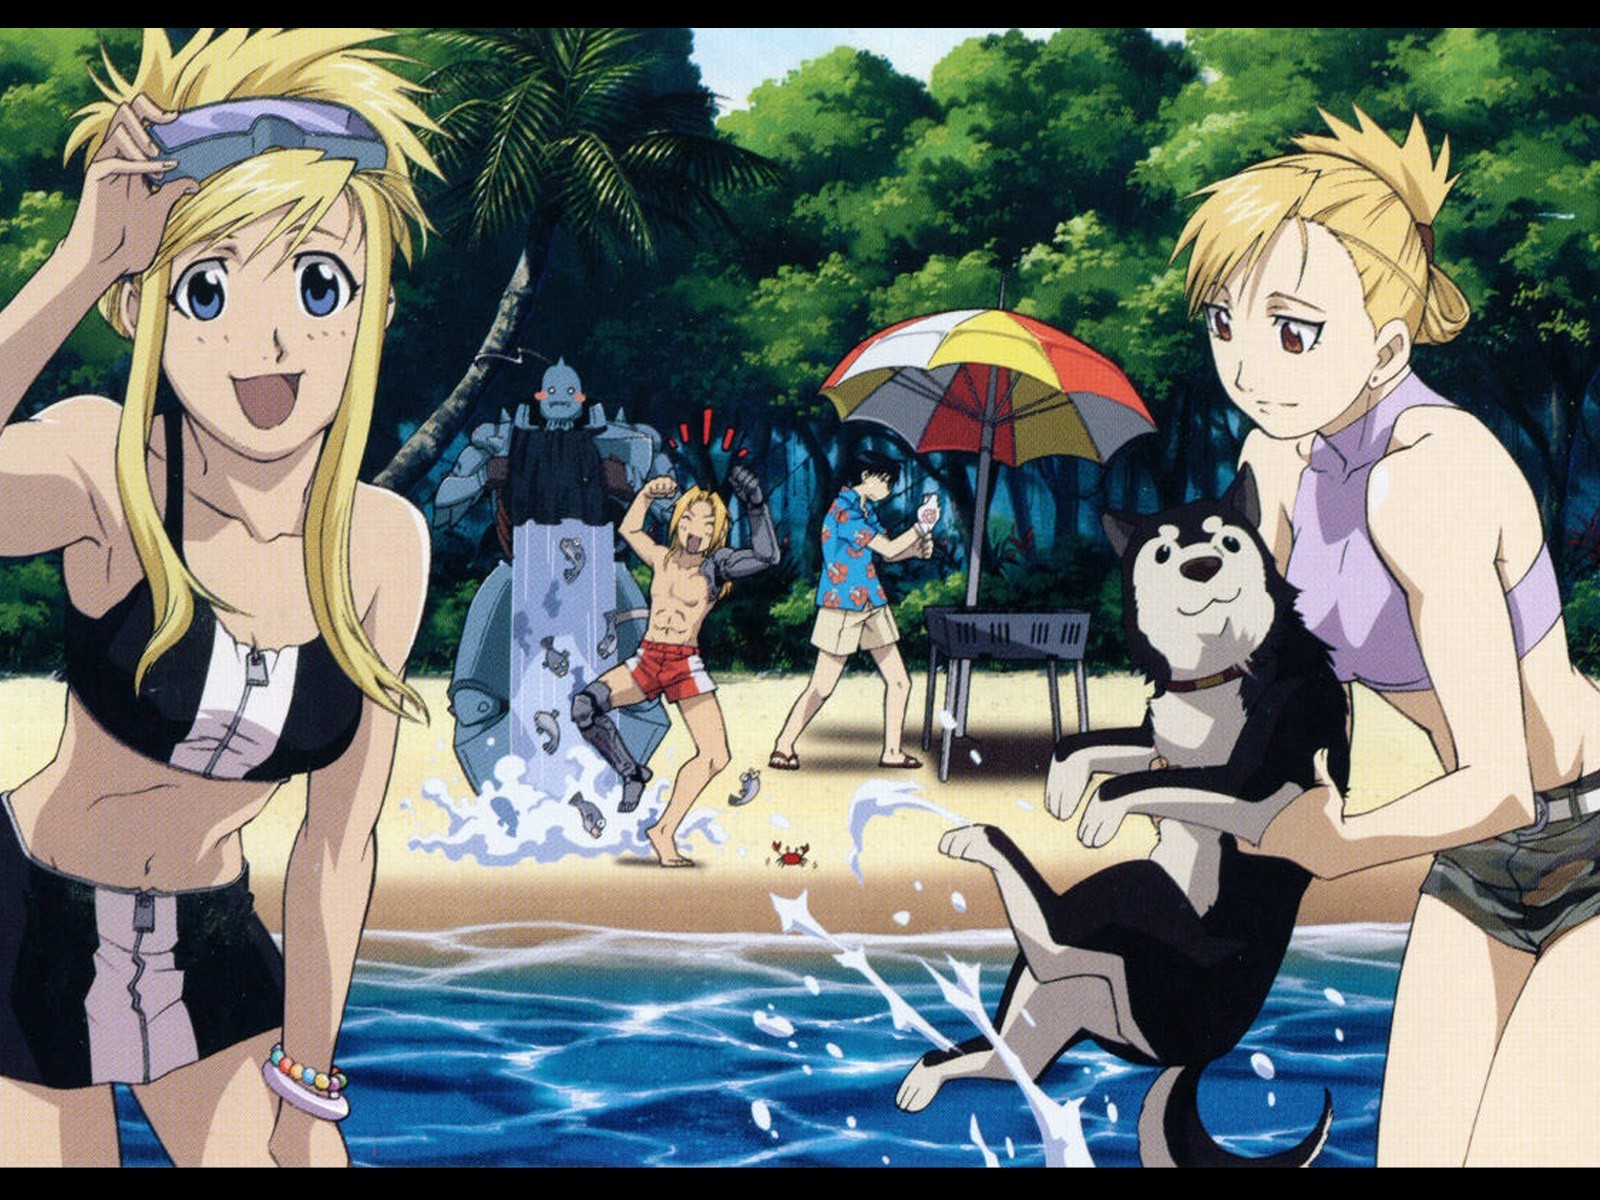 [Especial] - ANIMAX 20 Anos 46946-Rockbell_Winry-Elric_Alphonse-Roy_Mustang-Riza_Hawkeye